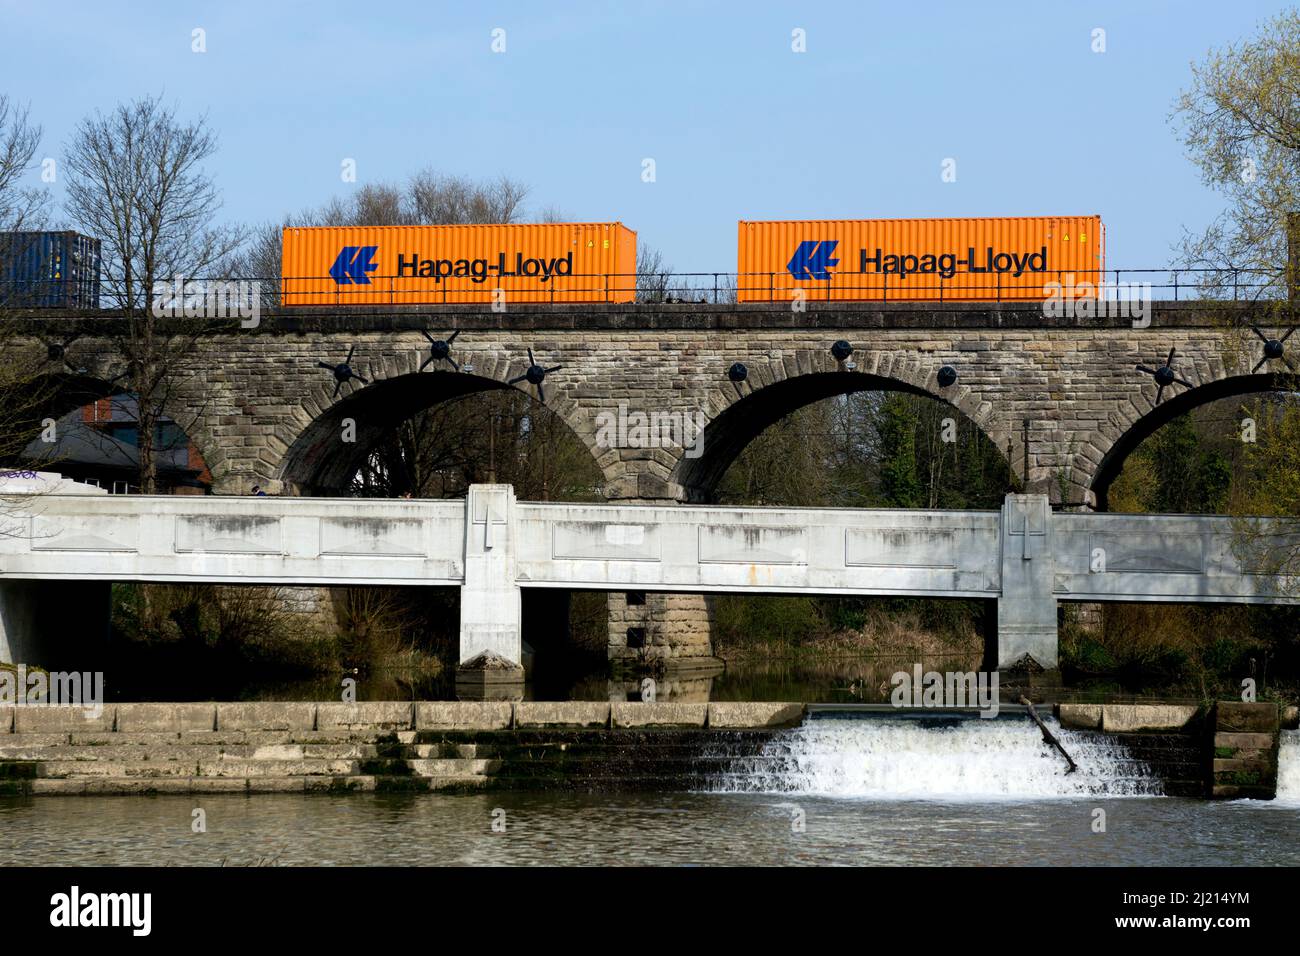 Hapag-Lloyd shipping containers on a freightliner train crossing Price`s Drive viaduct, Leamington Spa, UK Stock Photo